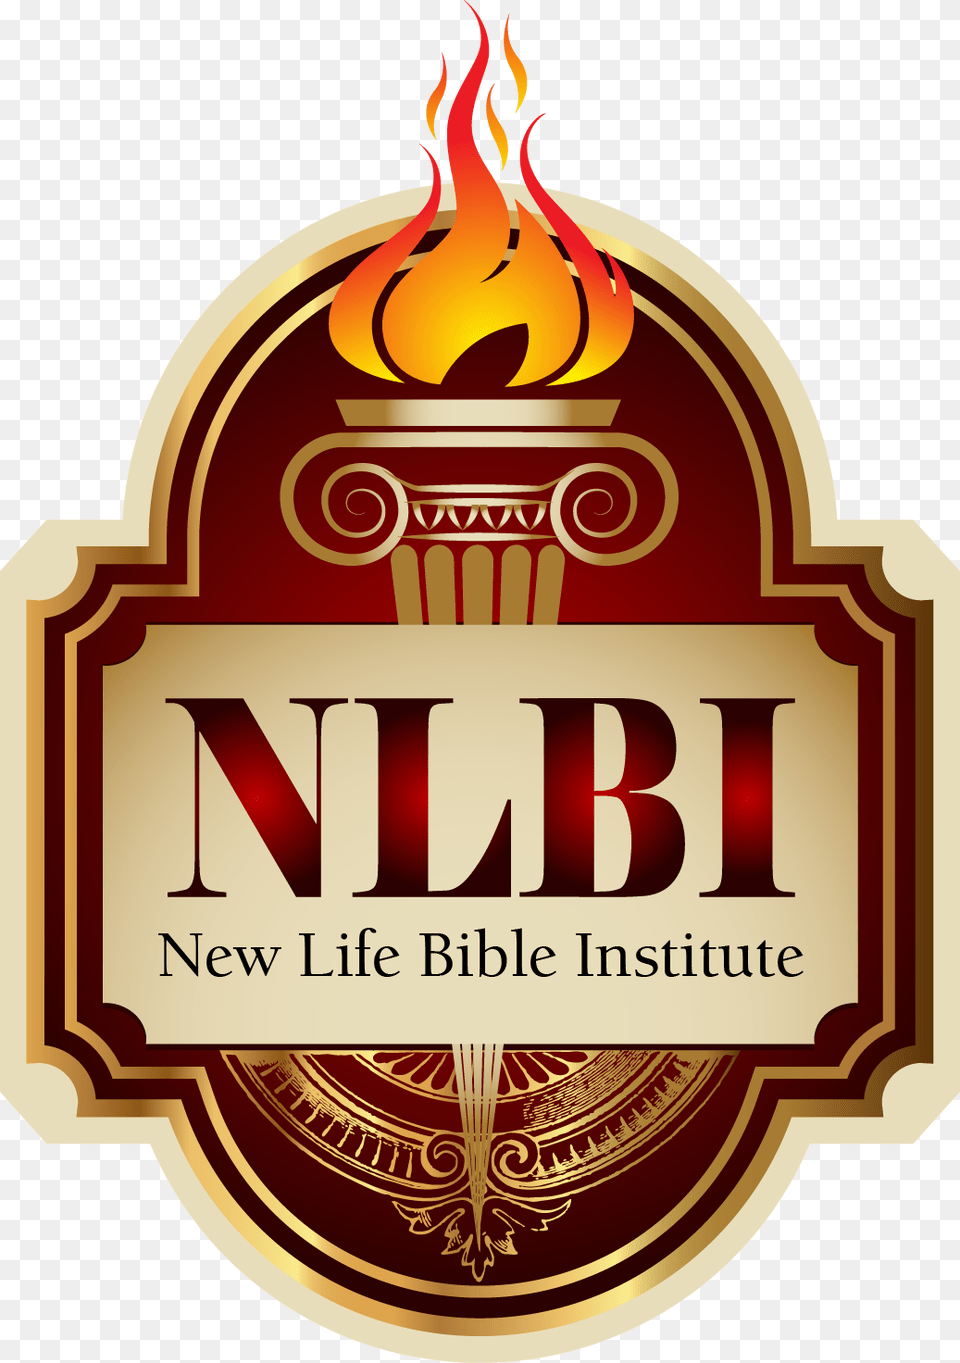 New Life Bible Institute Logo Label, Alcohol, Beer, Beverage, Lager Png